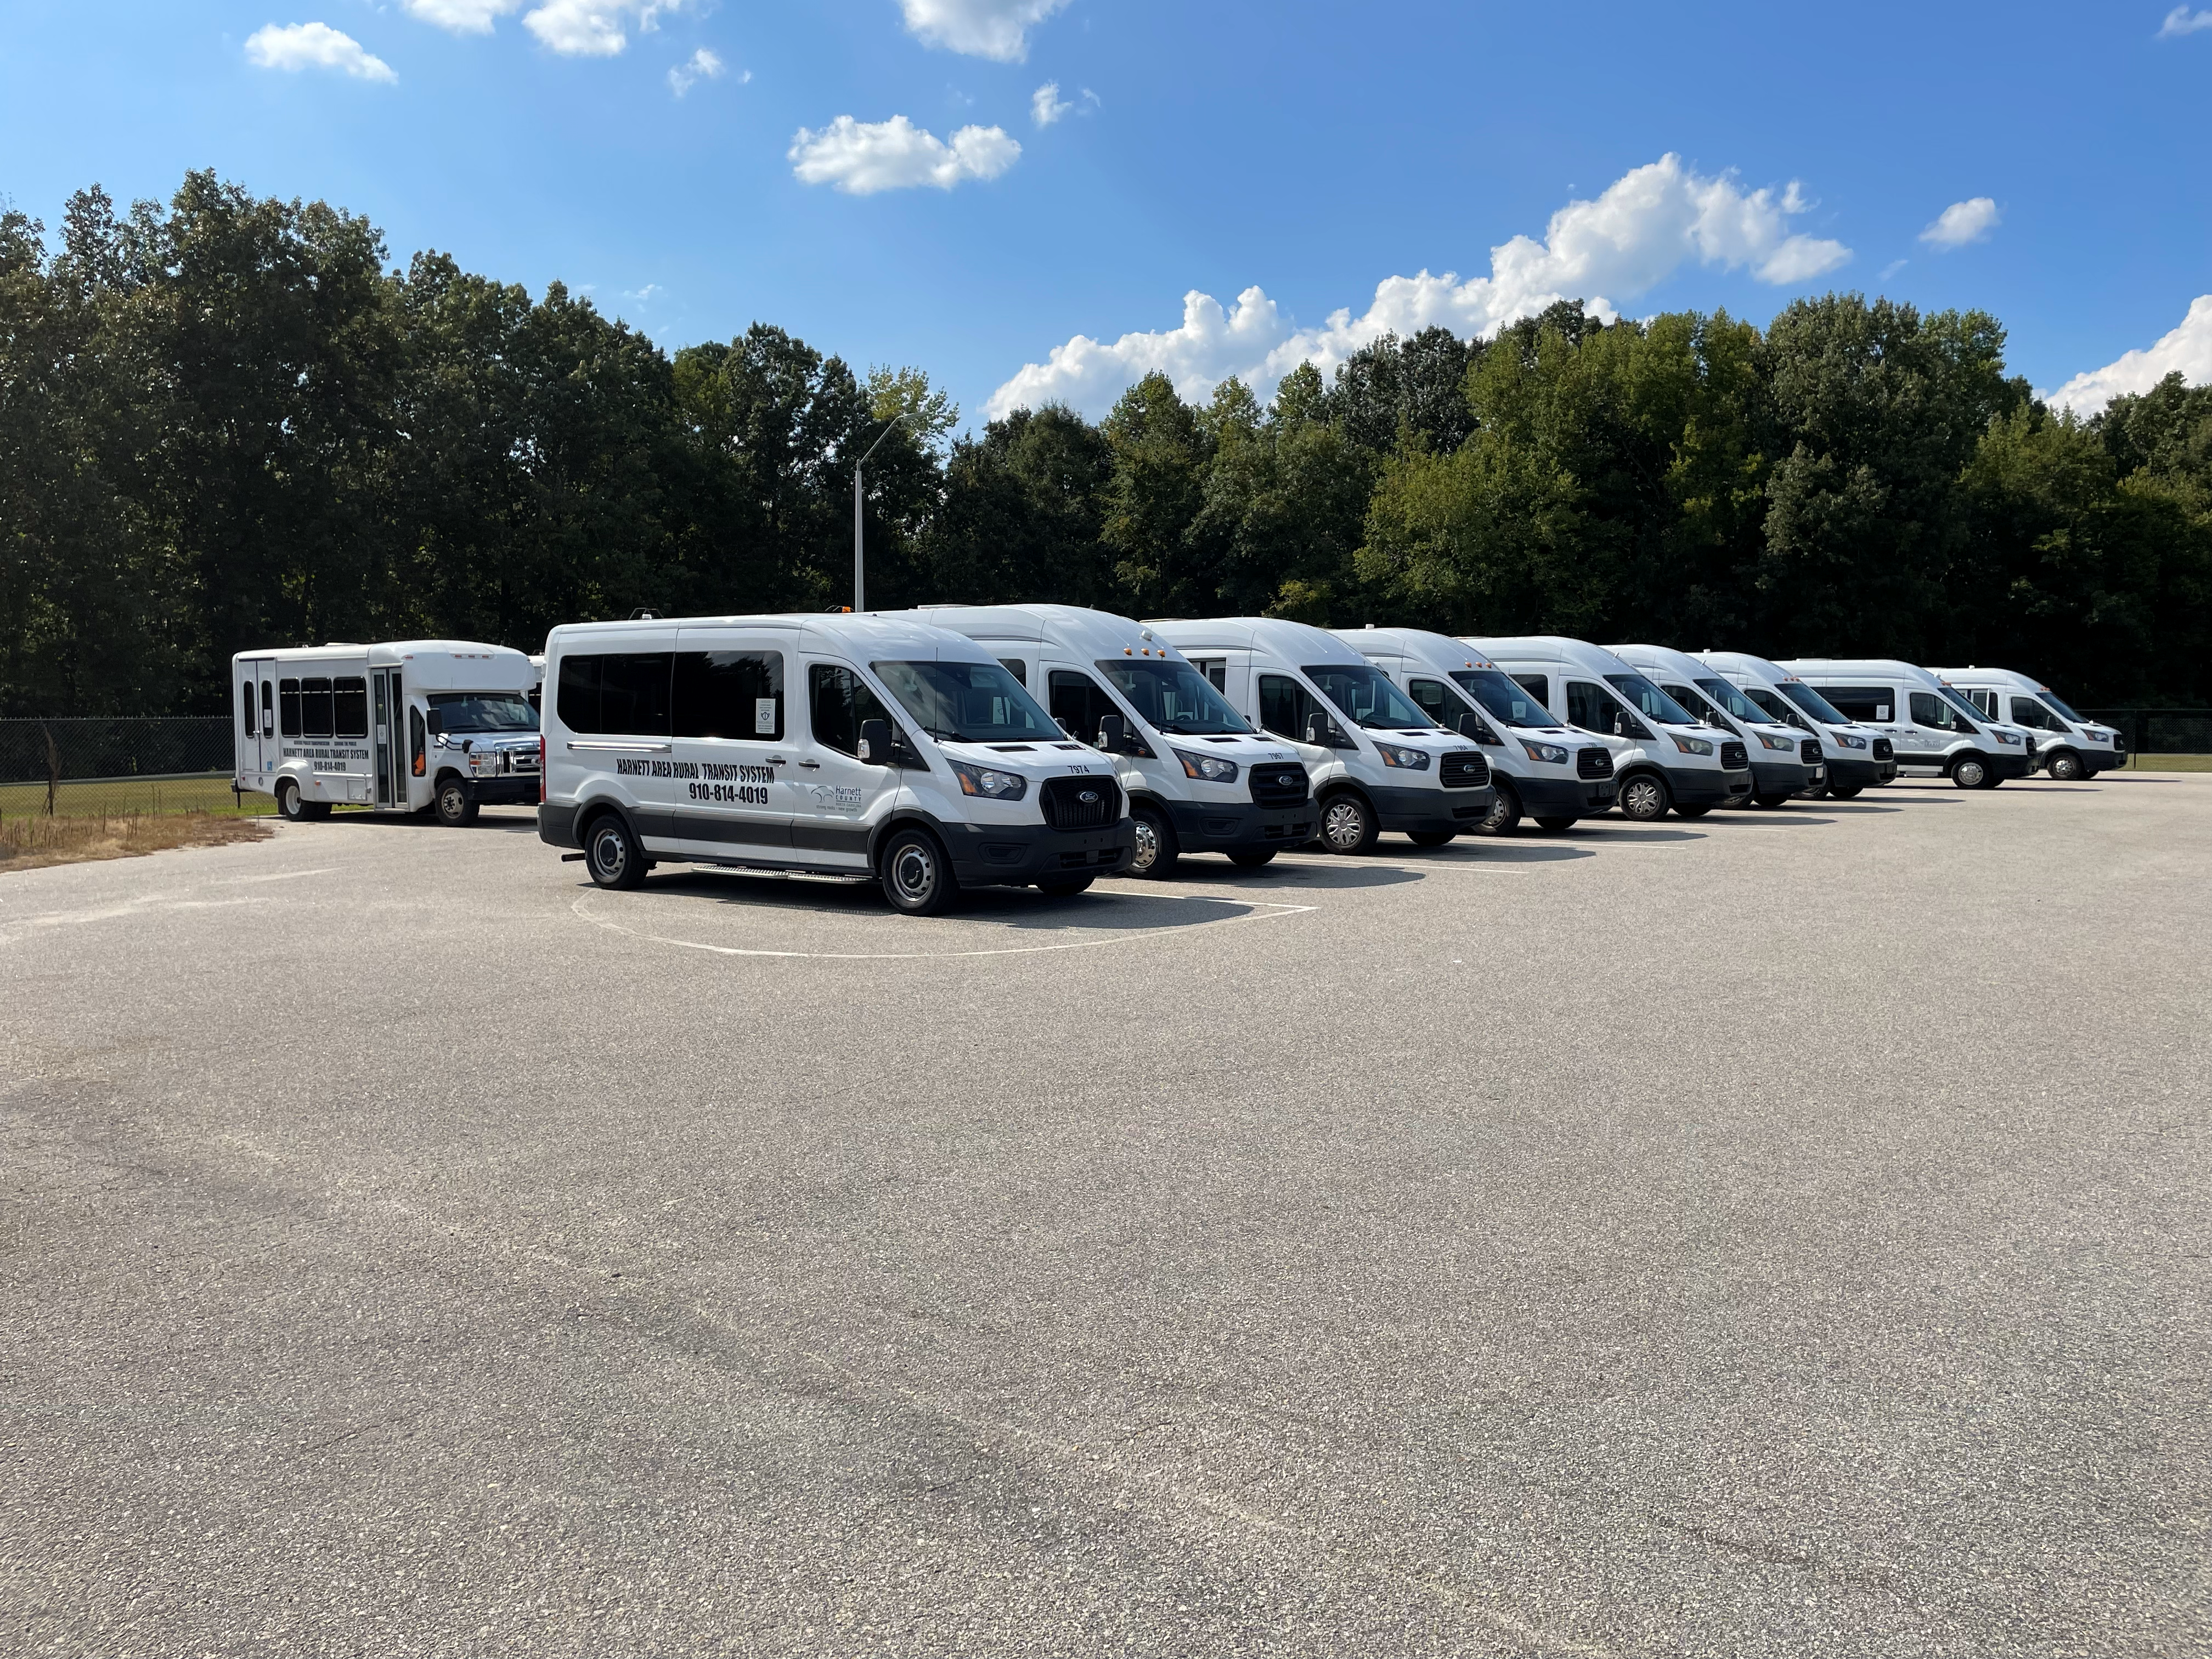 HARTS is a paratransit service and a ridesharing public transportation system that enables routes and schedules to be structured to transport County citizens to various destinations.